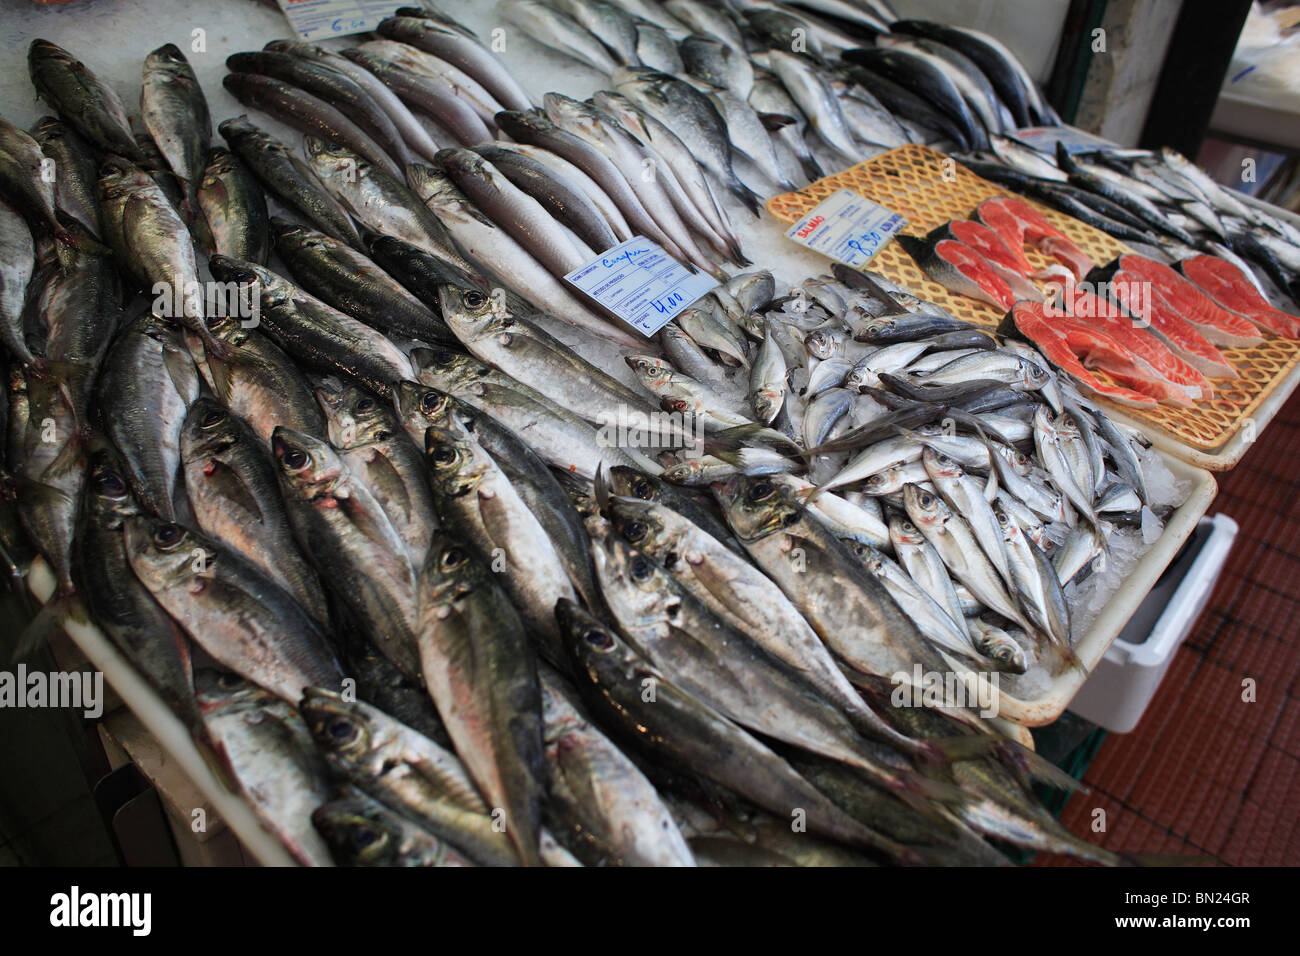 Display of fish in the Ribeira market, Lisbon, Portugal Stock Photo